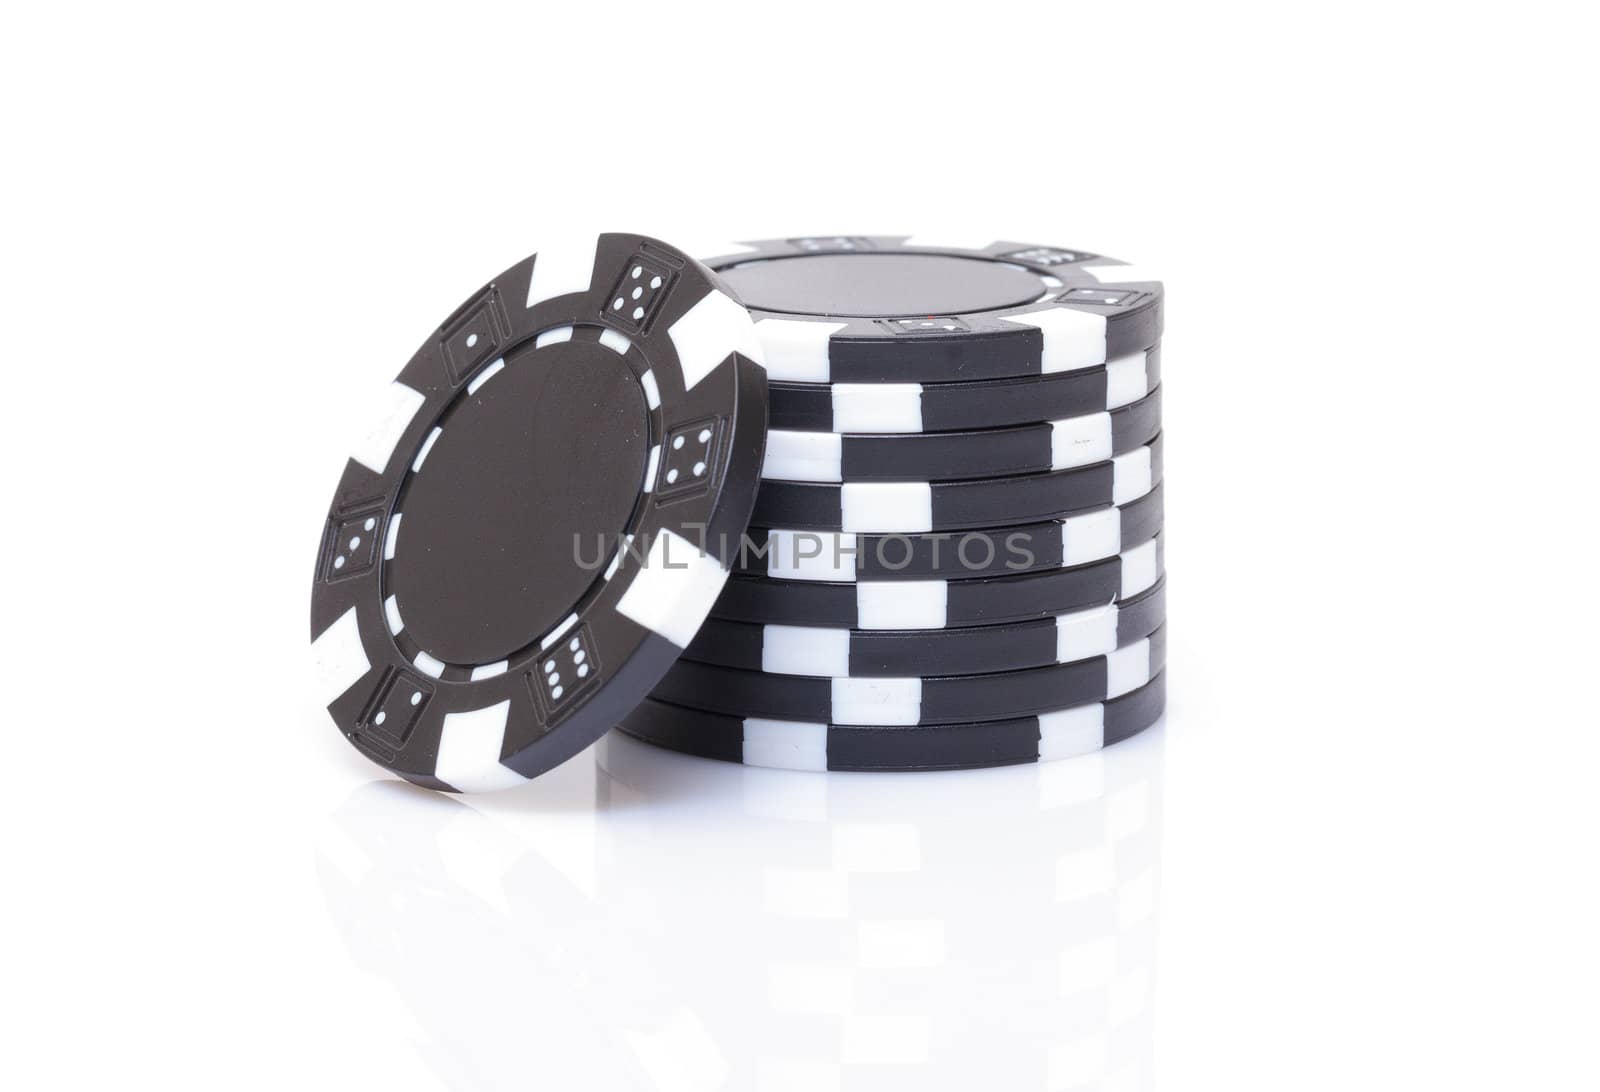 Small Stack of Black Poker Chips by Discovod